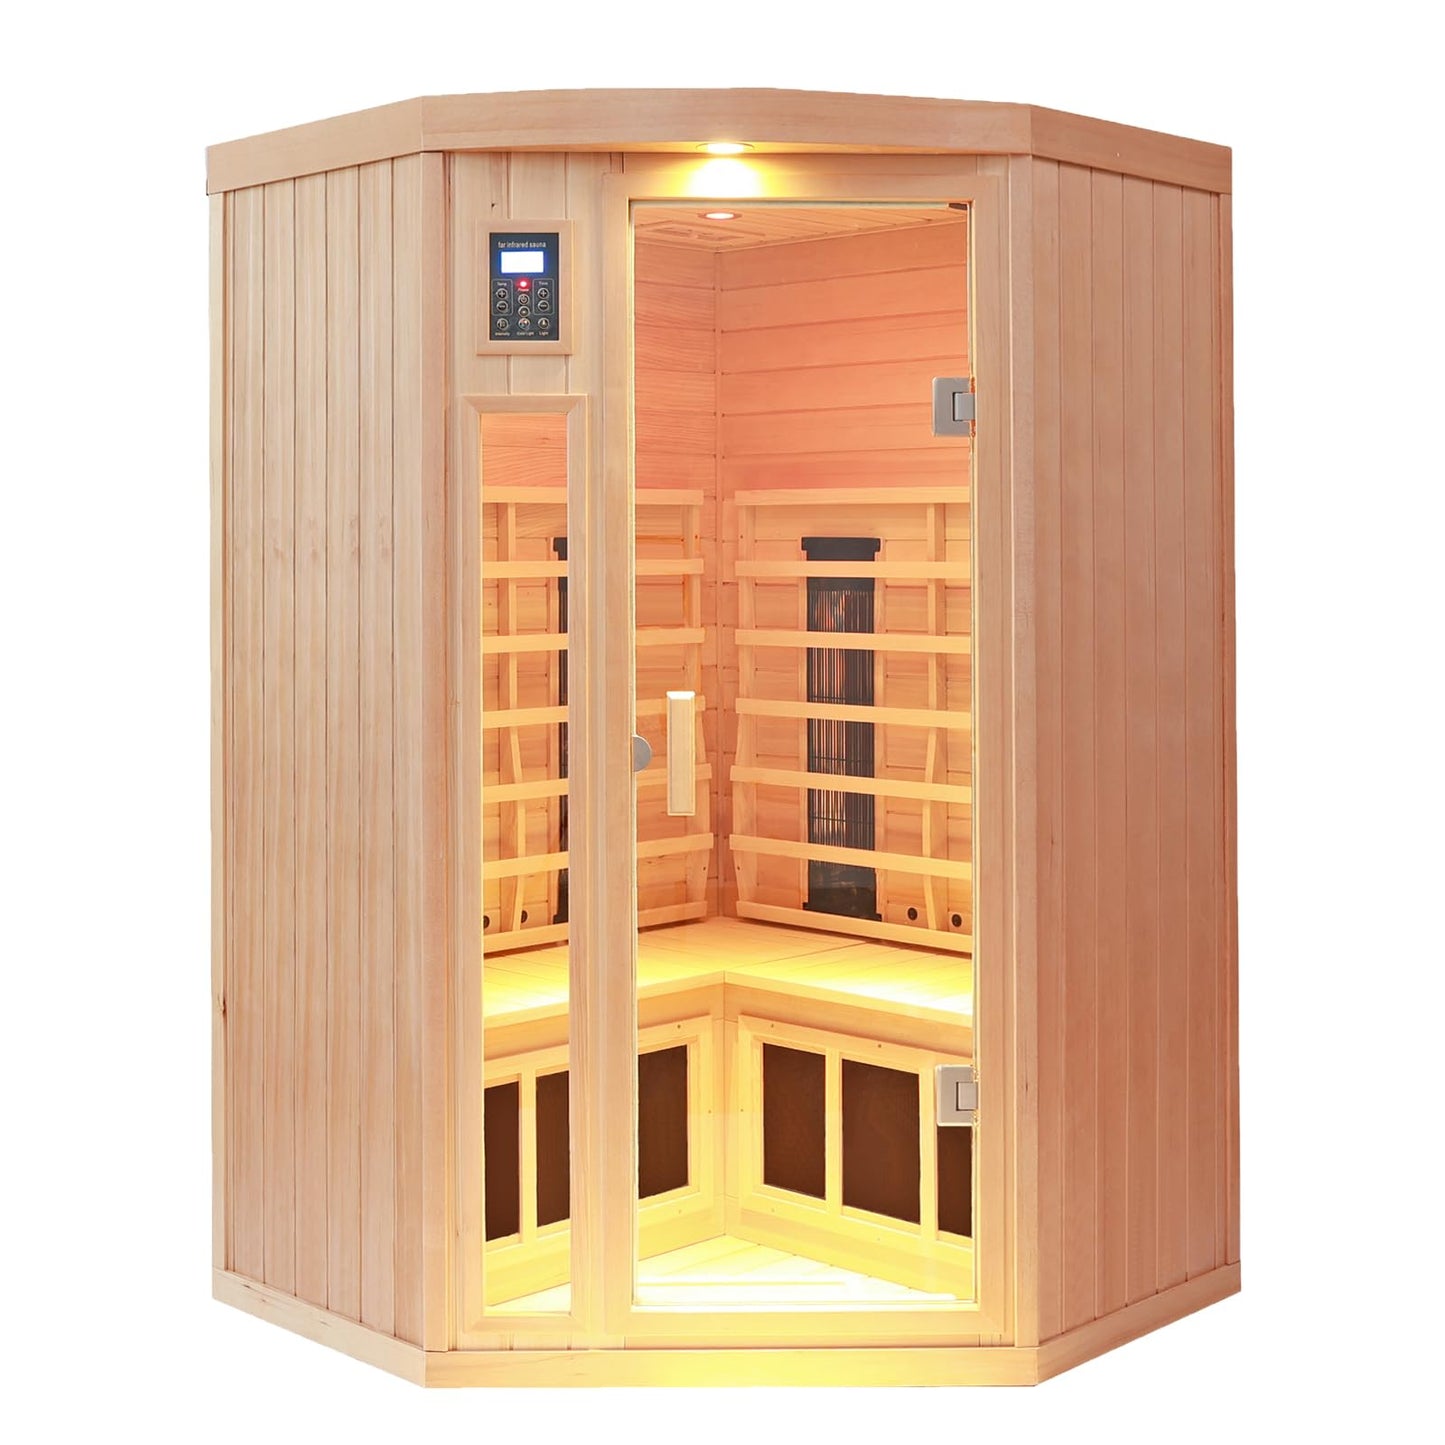 KUNSANA Ceramic Infrared Sauna 2 Person Far Infrared Sauna Low EMF Indoor Saunas for Home Hemlock Wooden Sauna Room with Bluetooth Speakers, LED Reading Lamps, Chromotherapy Lights